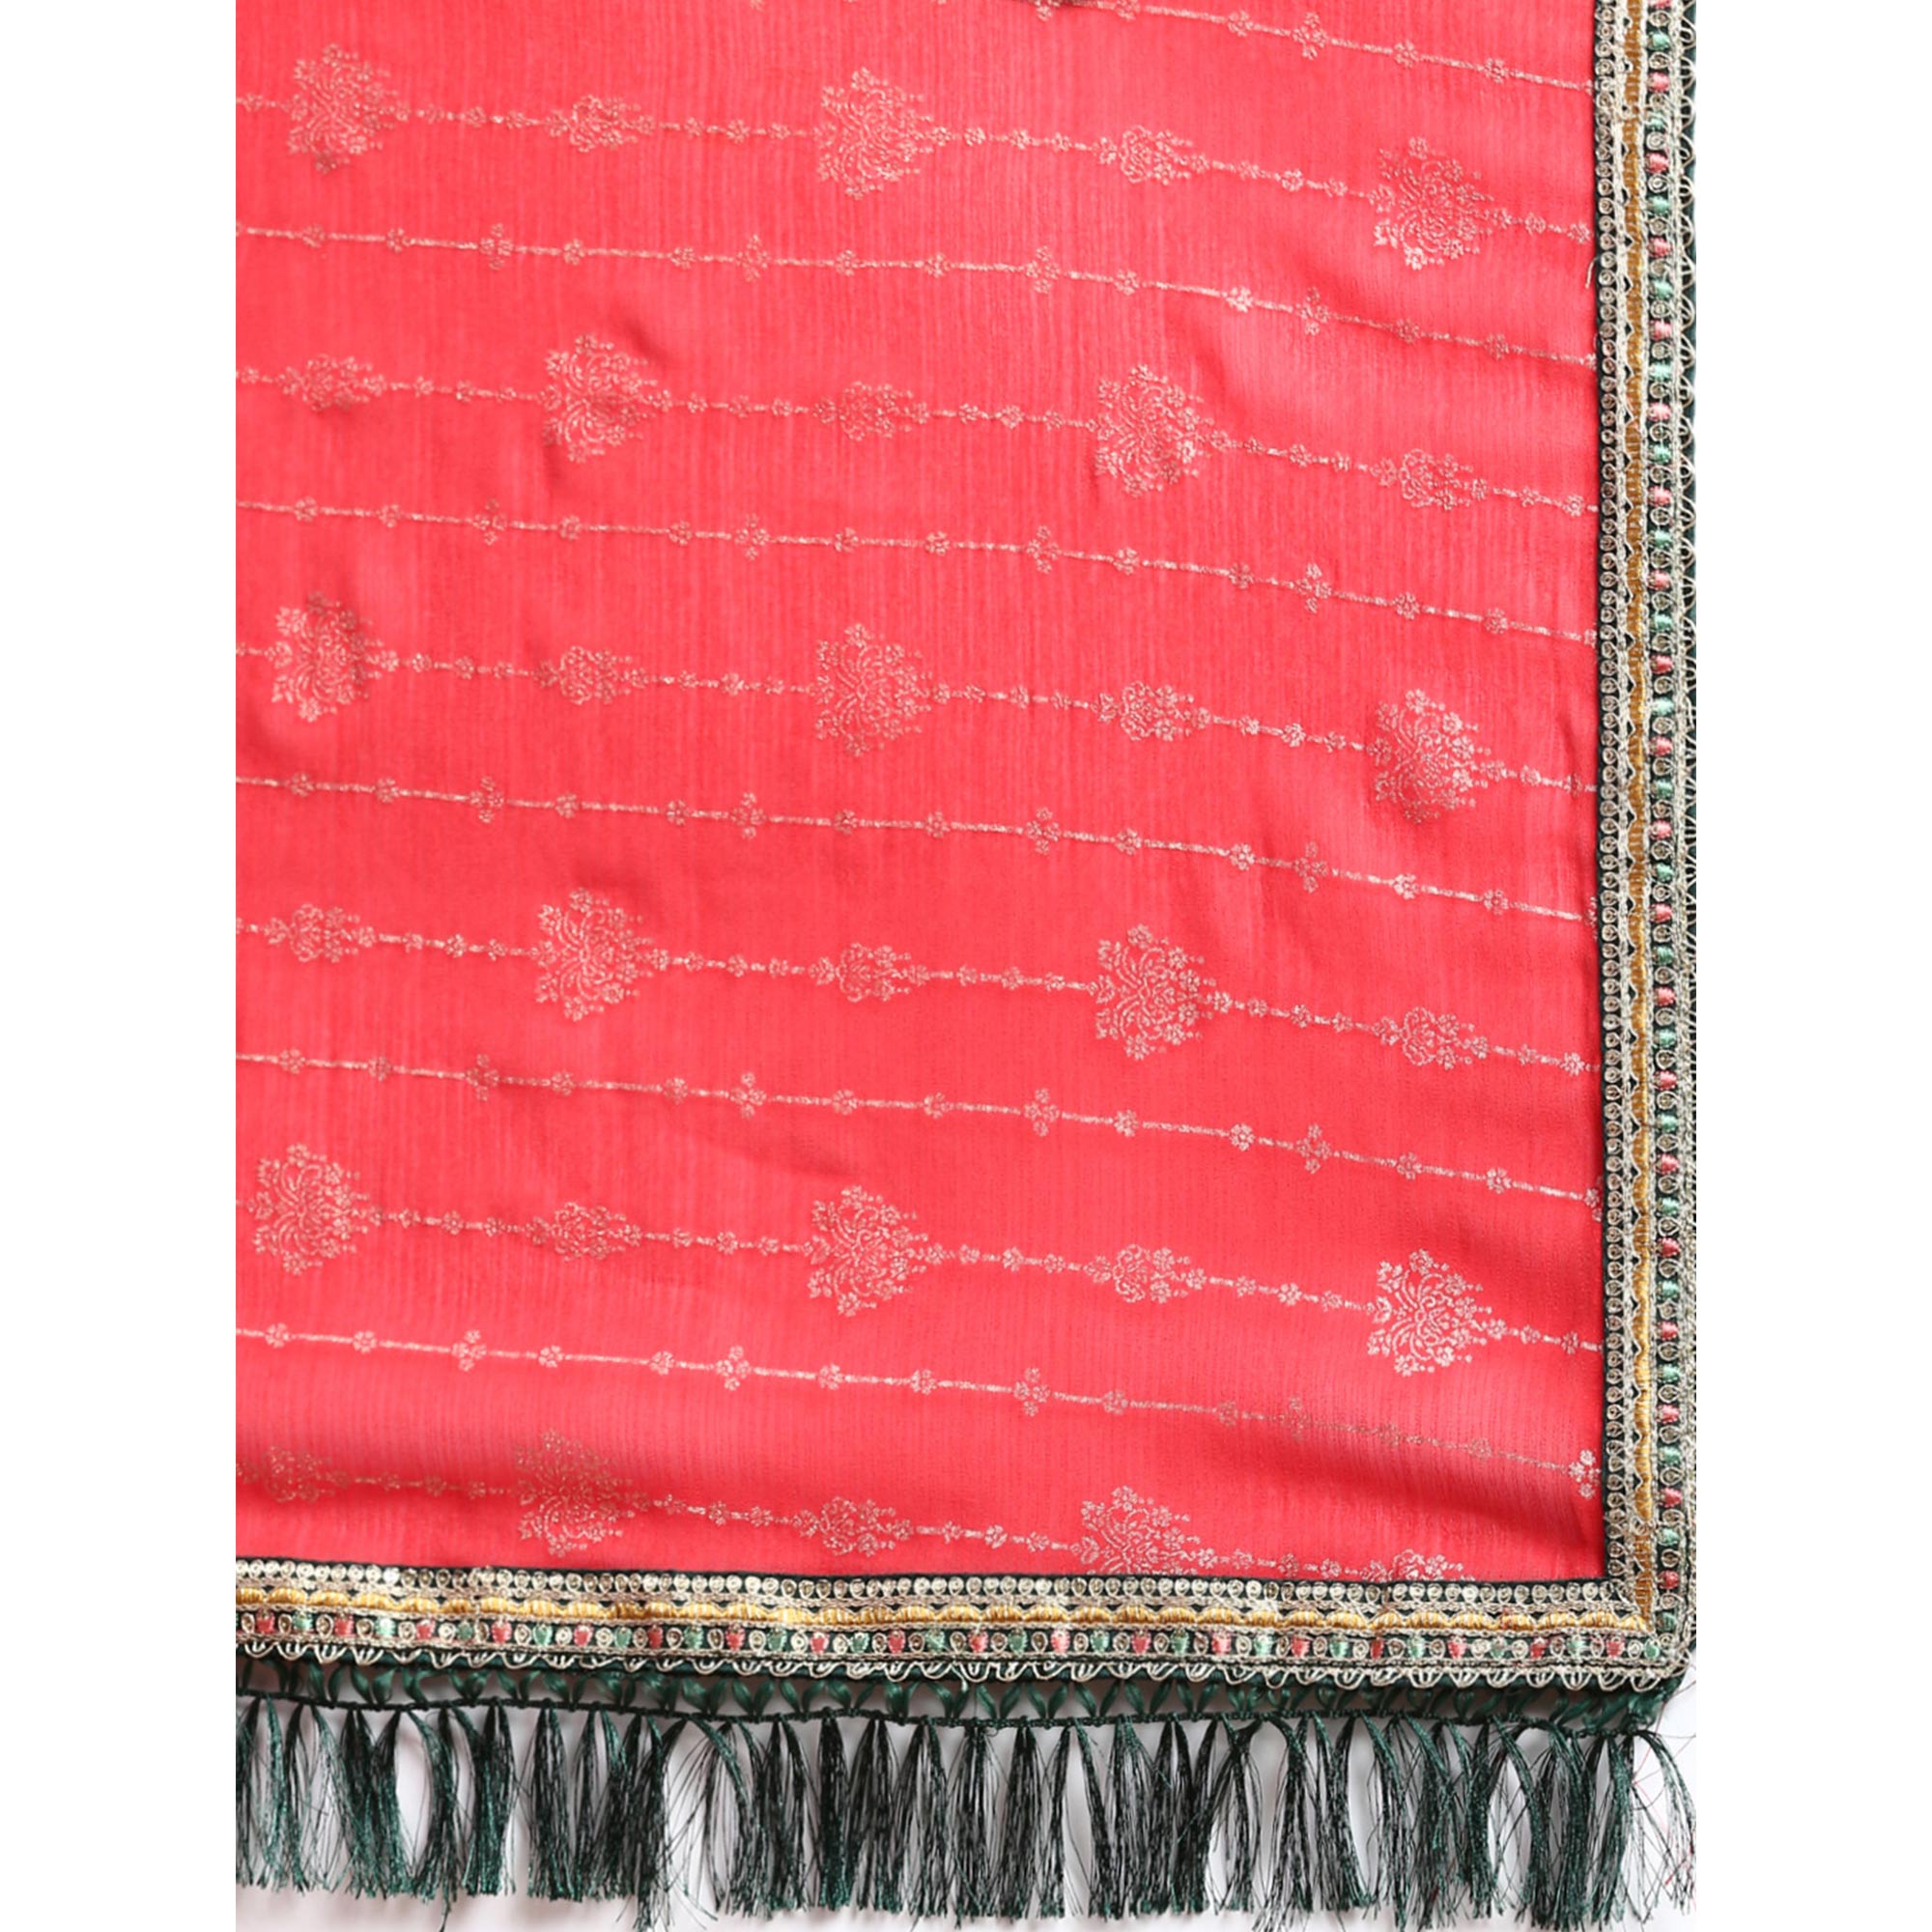 Red Foil Printed With Fancy Border Zomato Silk Saree